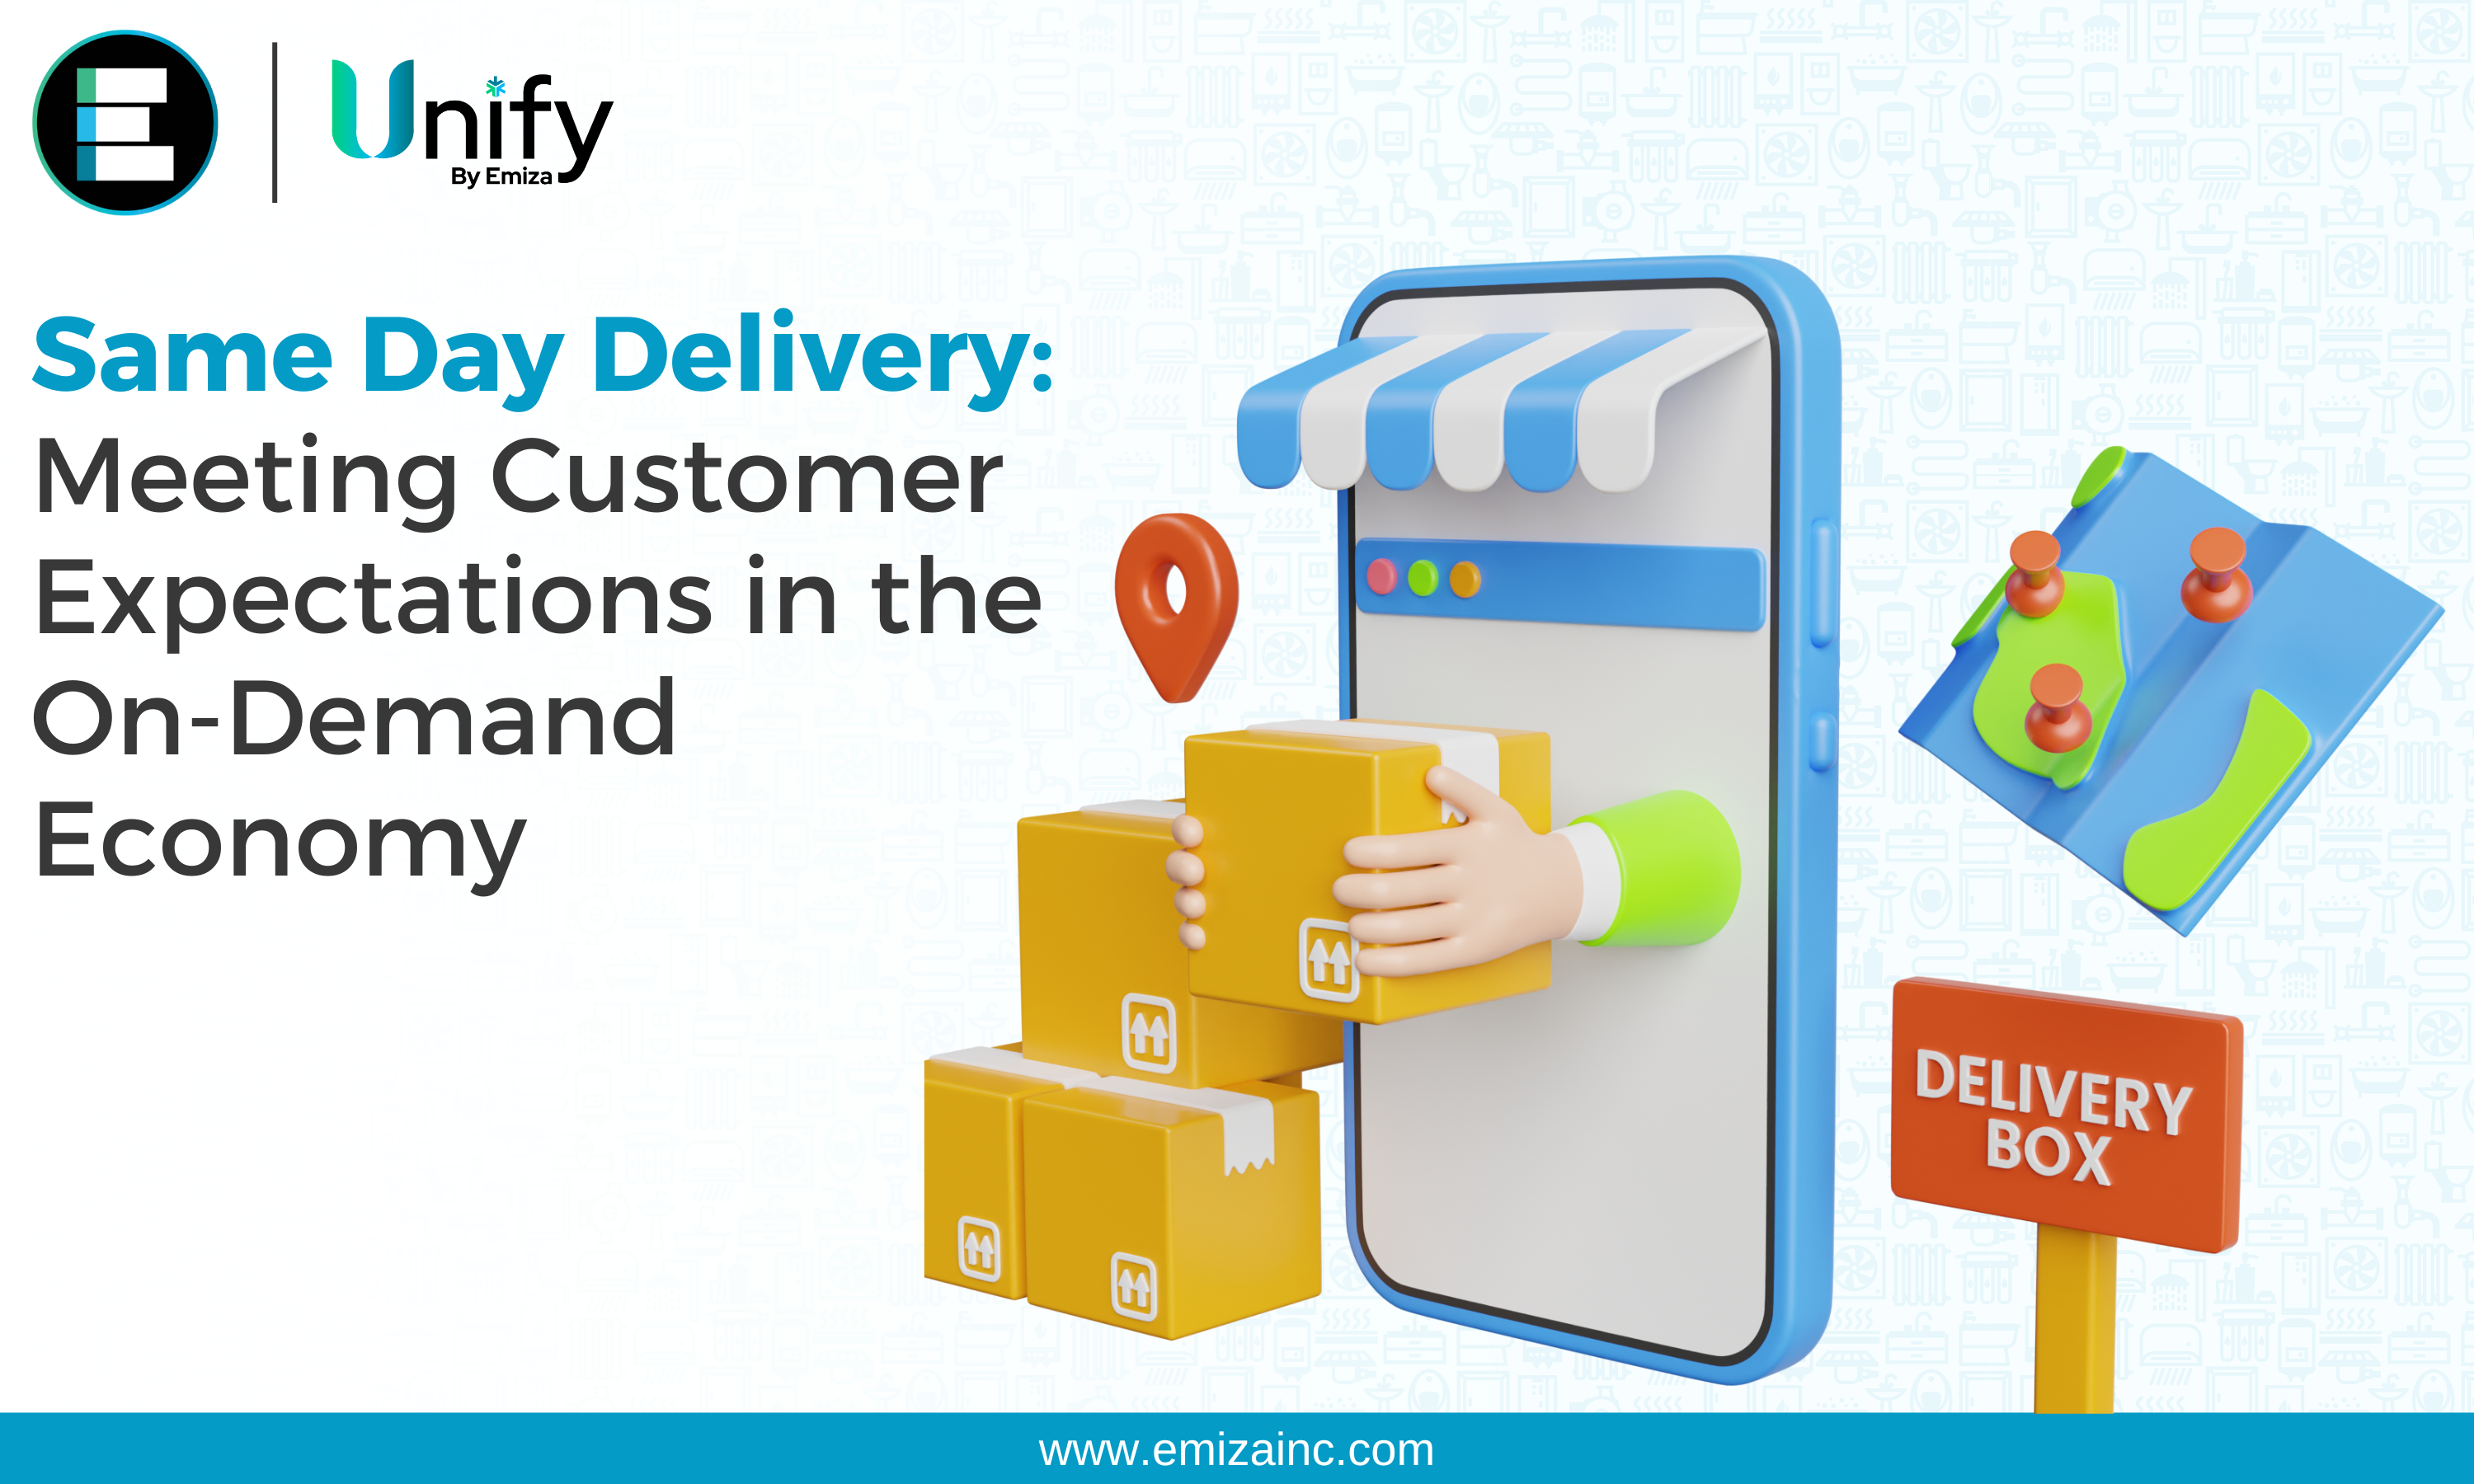 Same Day Delivery: Meeting Customer Expectations in the On-Demand Economy